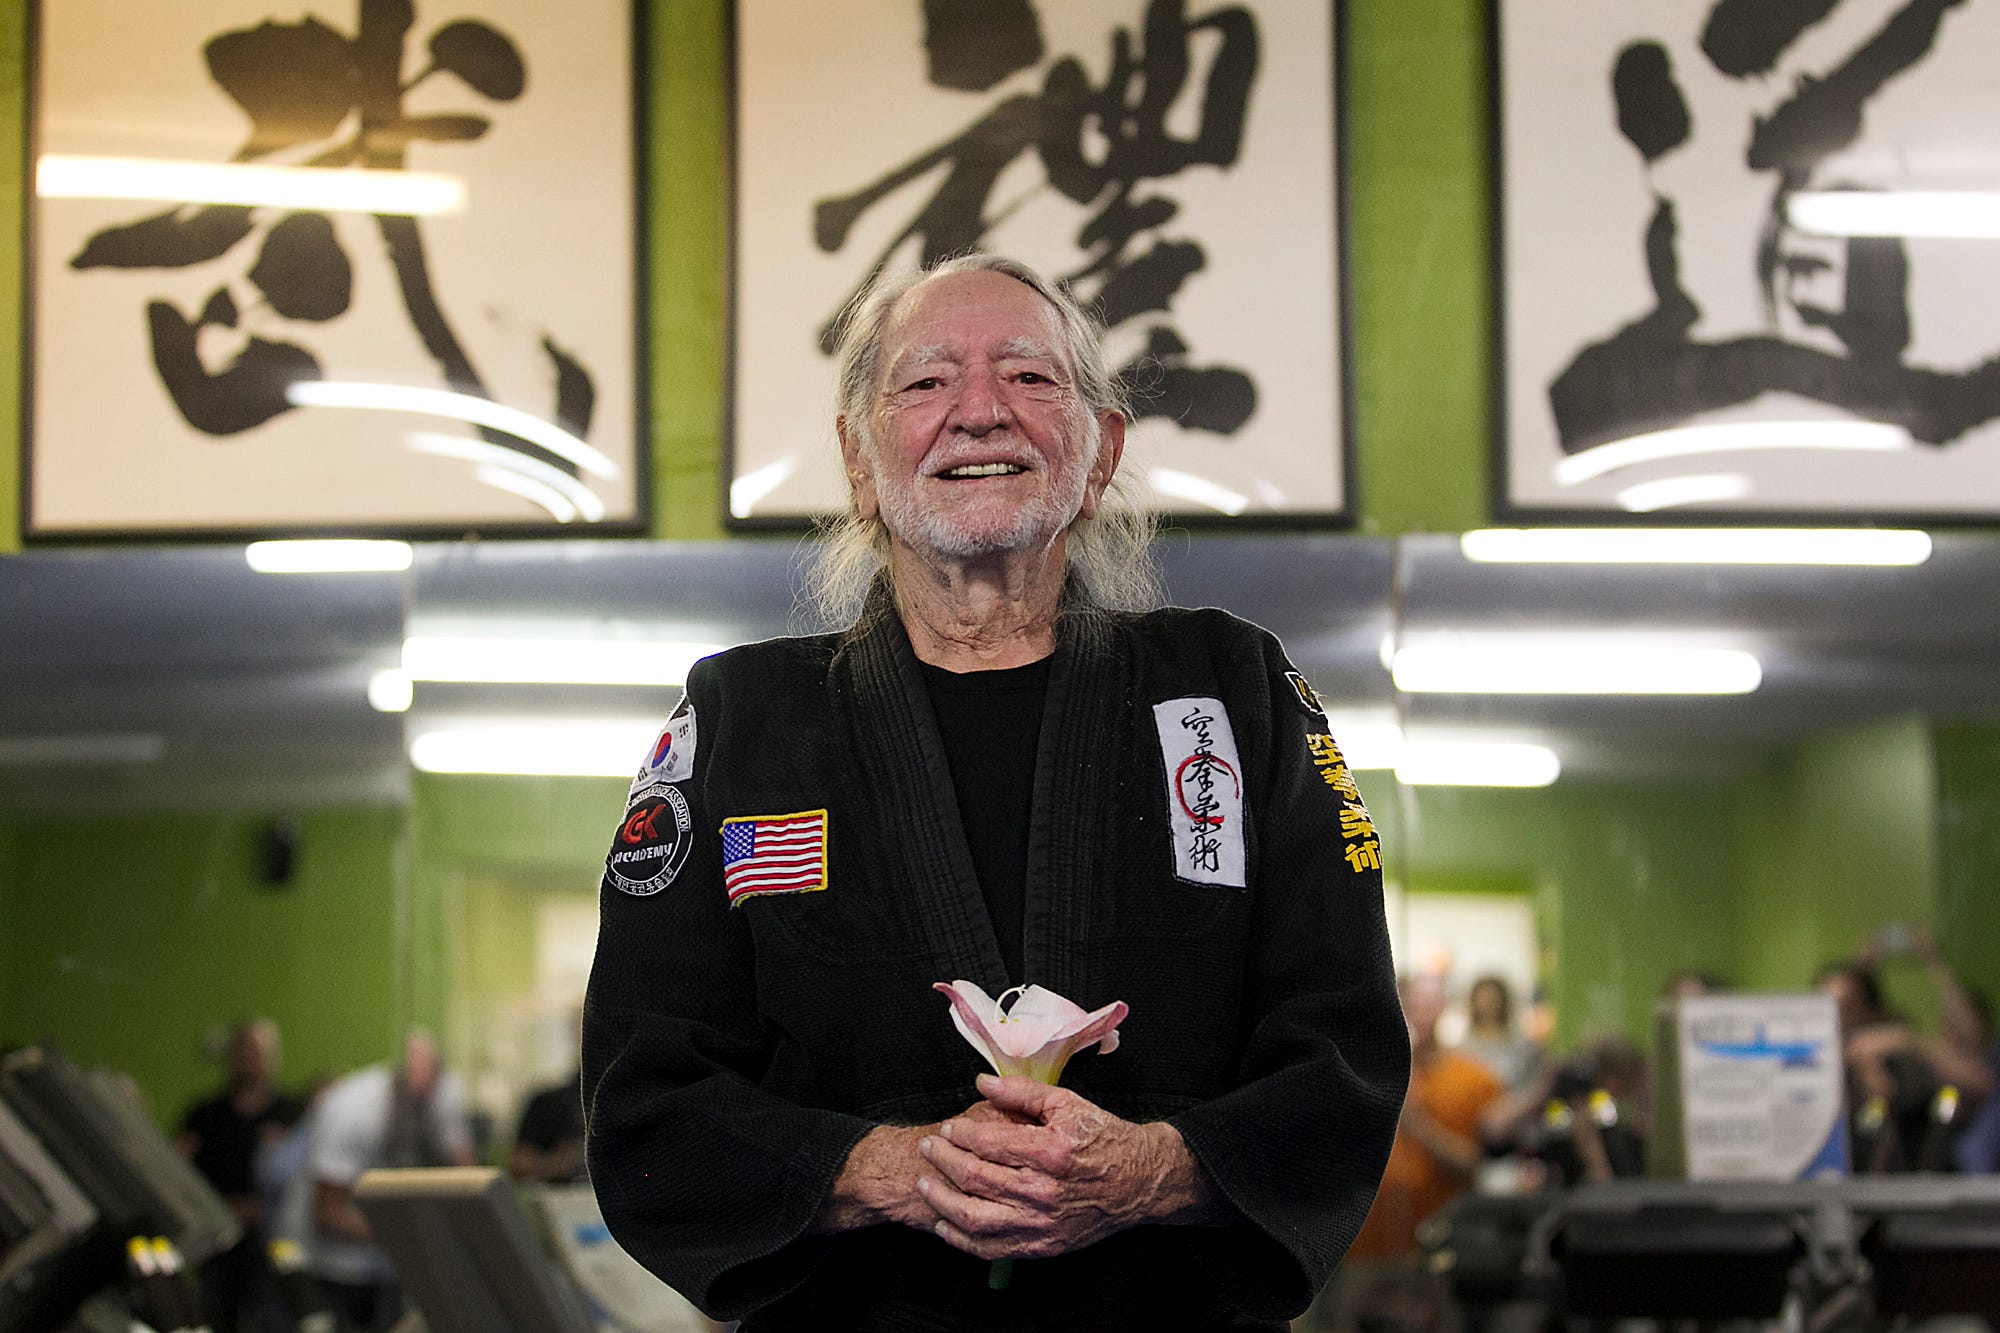 Austin music legend Willie Nelson celebrated his 81st birthday one day early by being presented with his fifth-degree black belt in Gong Kwon Yu Sul by Master Um of Master Martial Arts in Austin, TX. Nelson holds a flower given to him by Ava Golab, 6, as the crowd serenaded him a chorus of Happy Birthday. Nelson has been studying for twenty years and finally reached the lofty status of Master, as he was presented in a ceremony on April 28, 2014.